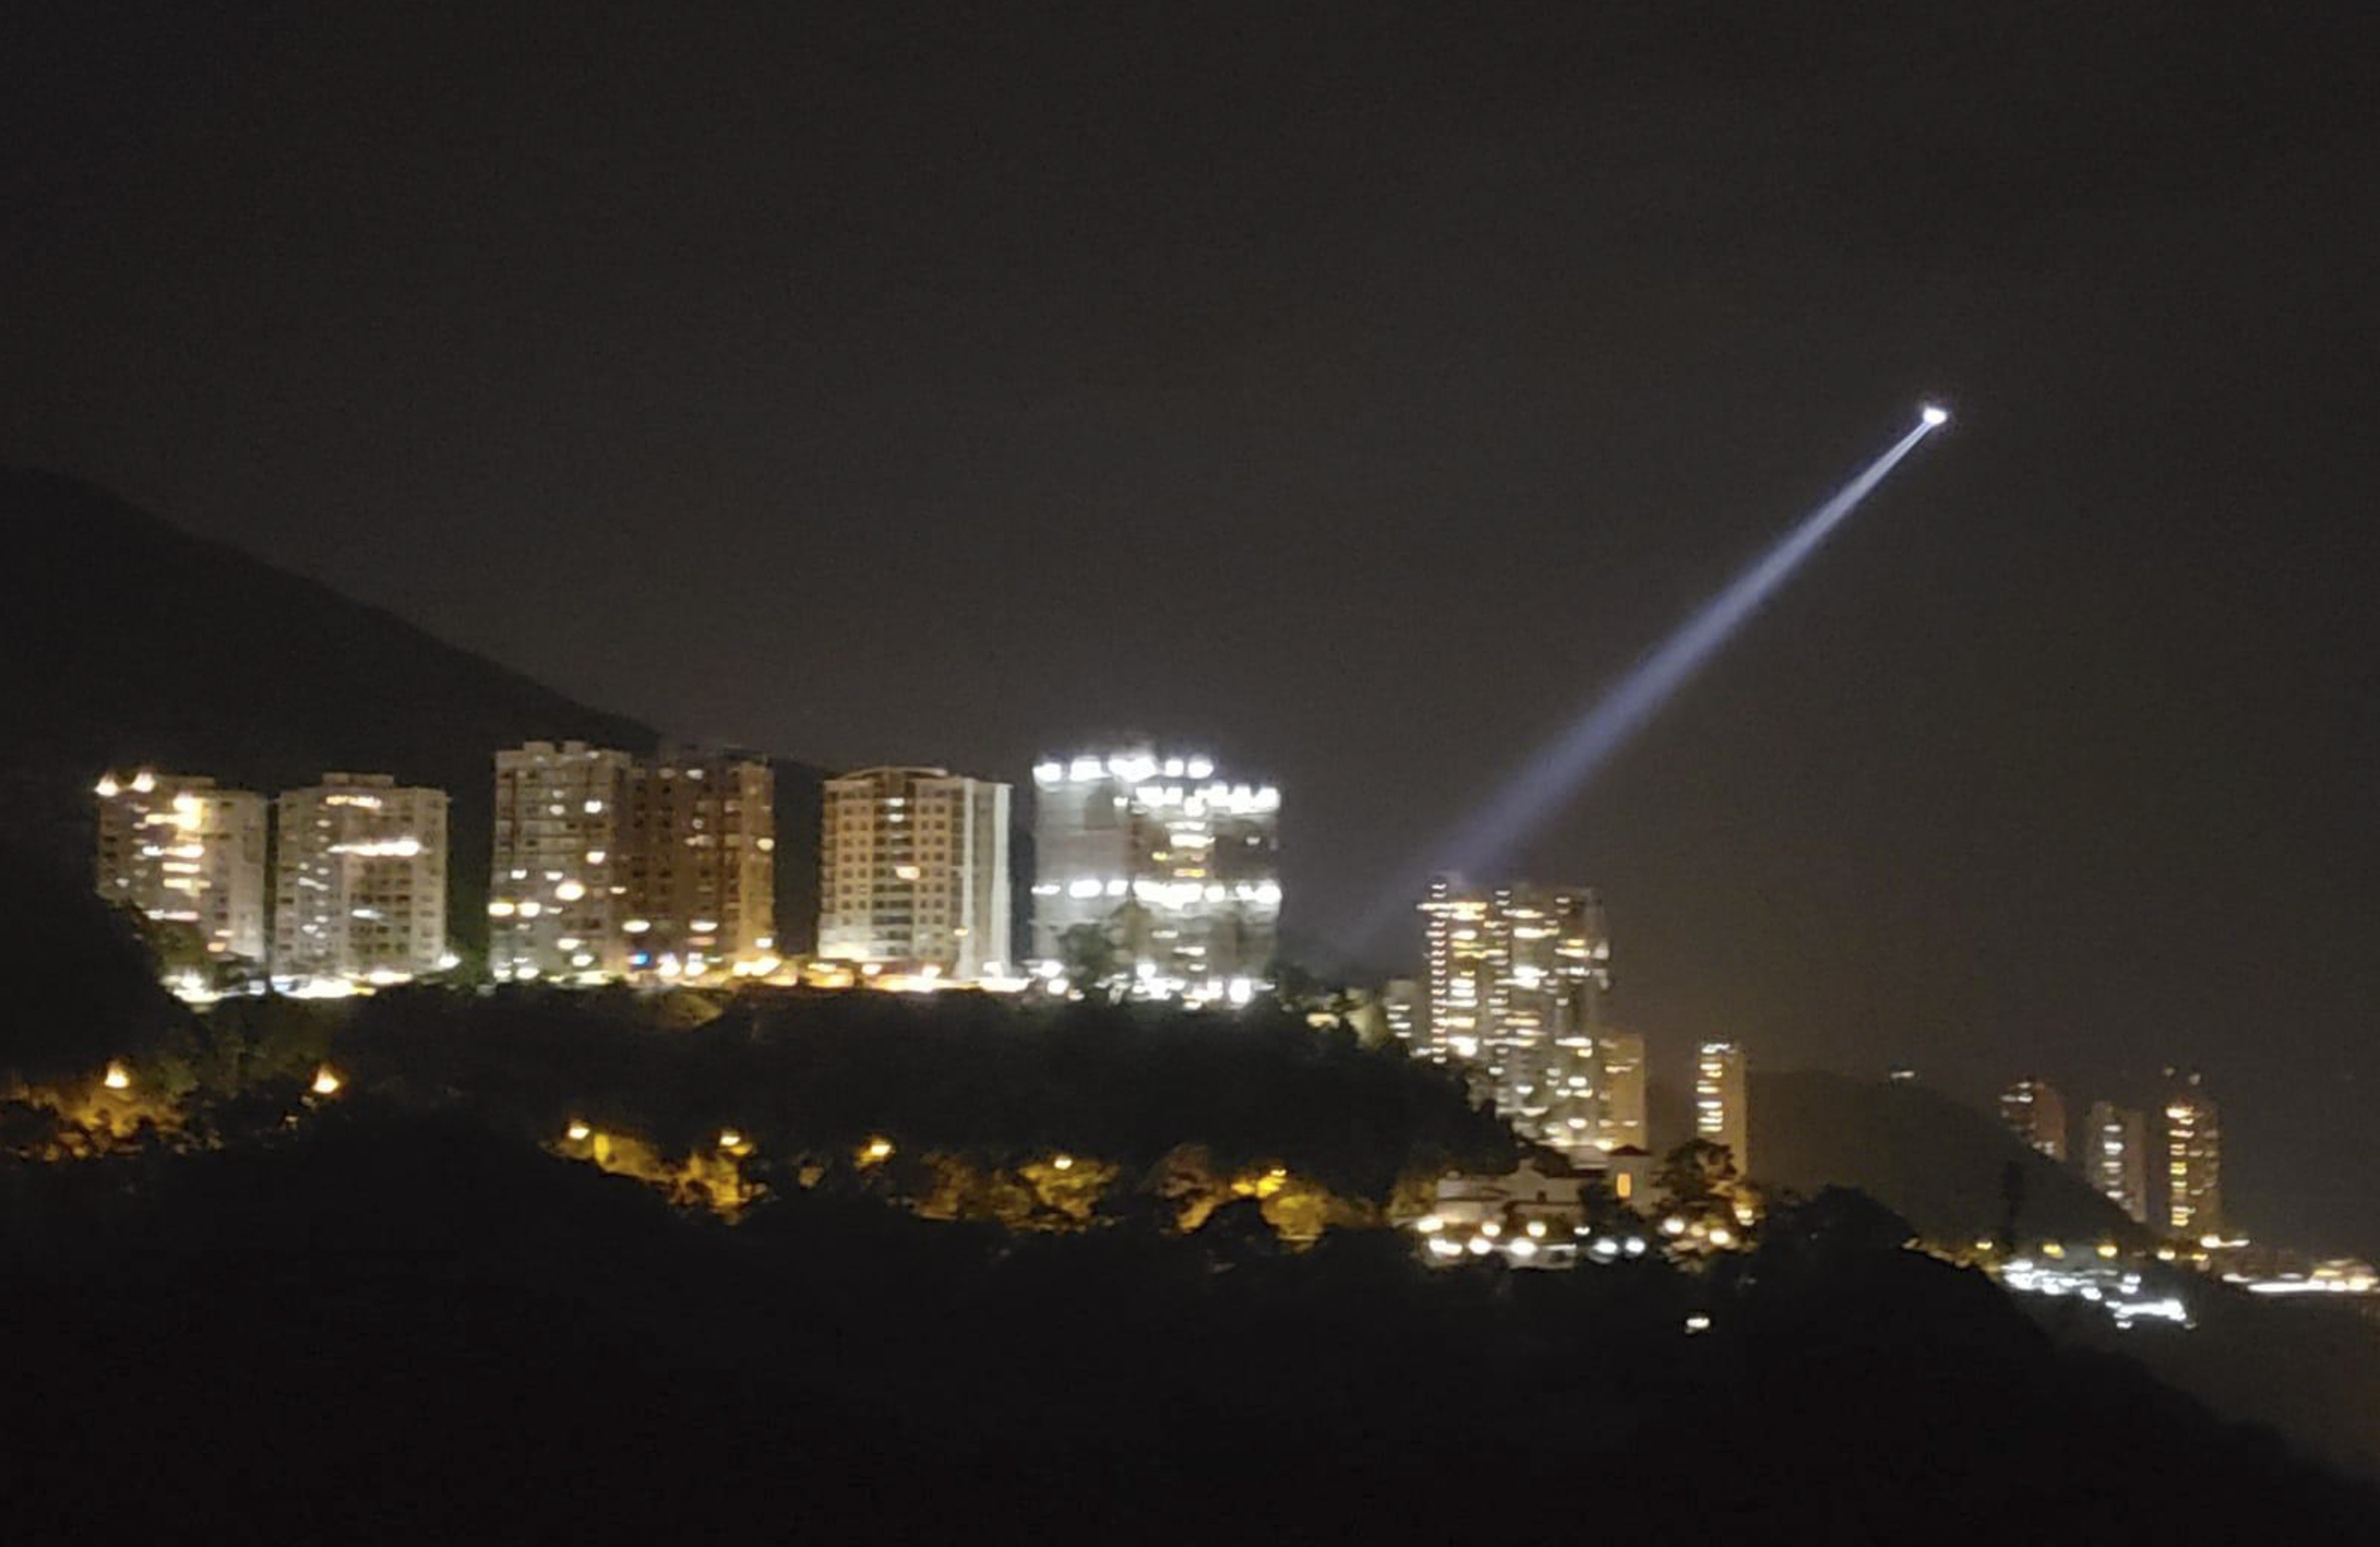 A government helicopter was deployed as part of the anti-burglary operation. Photo: Handout